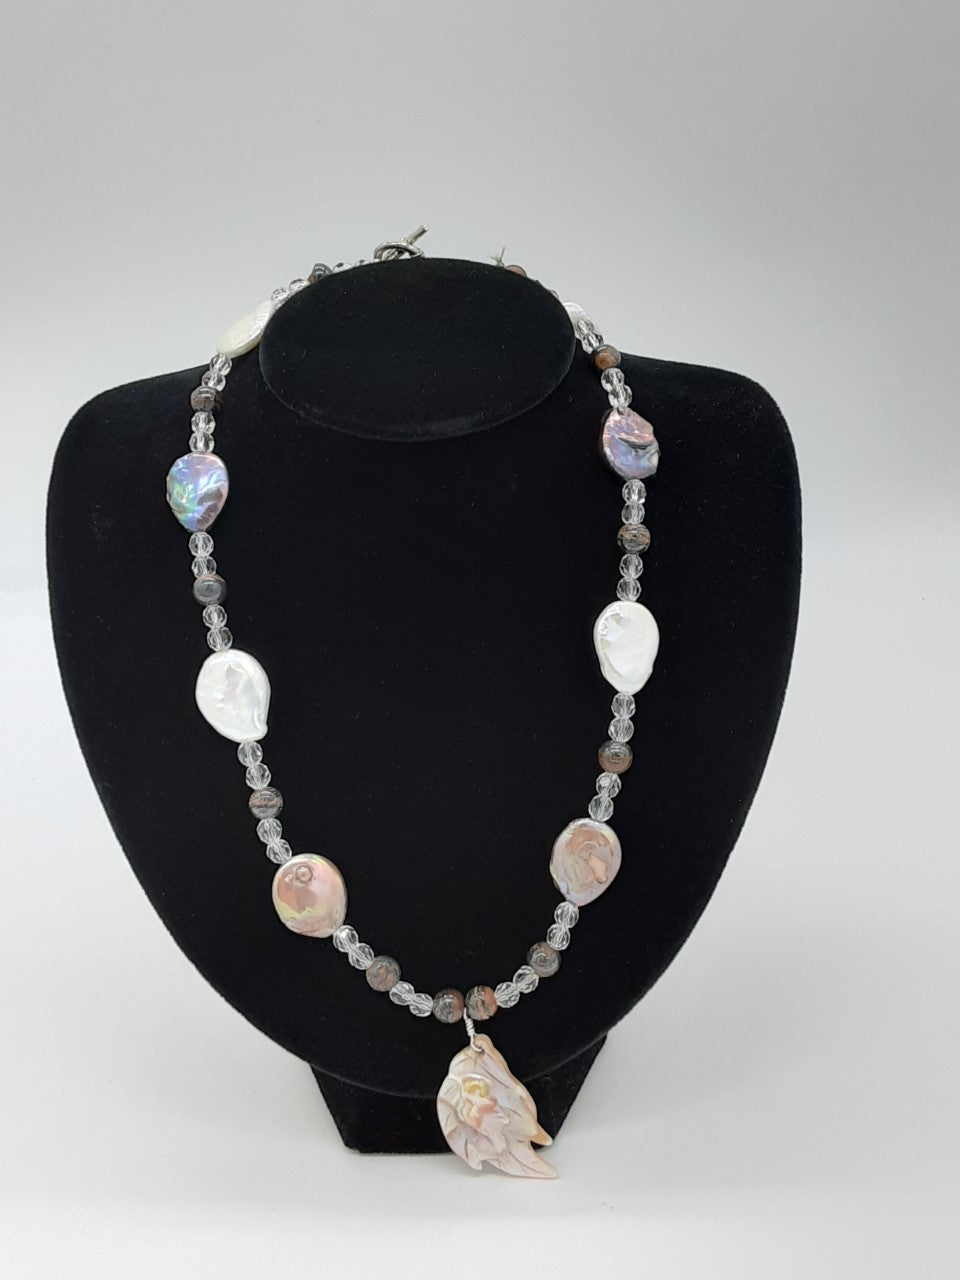 Necklace with irregular shaped pearls  and clear beads in between